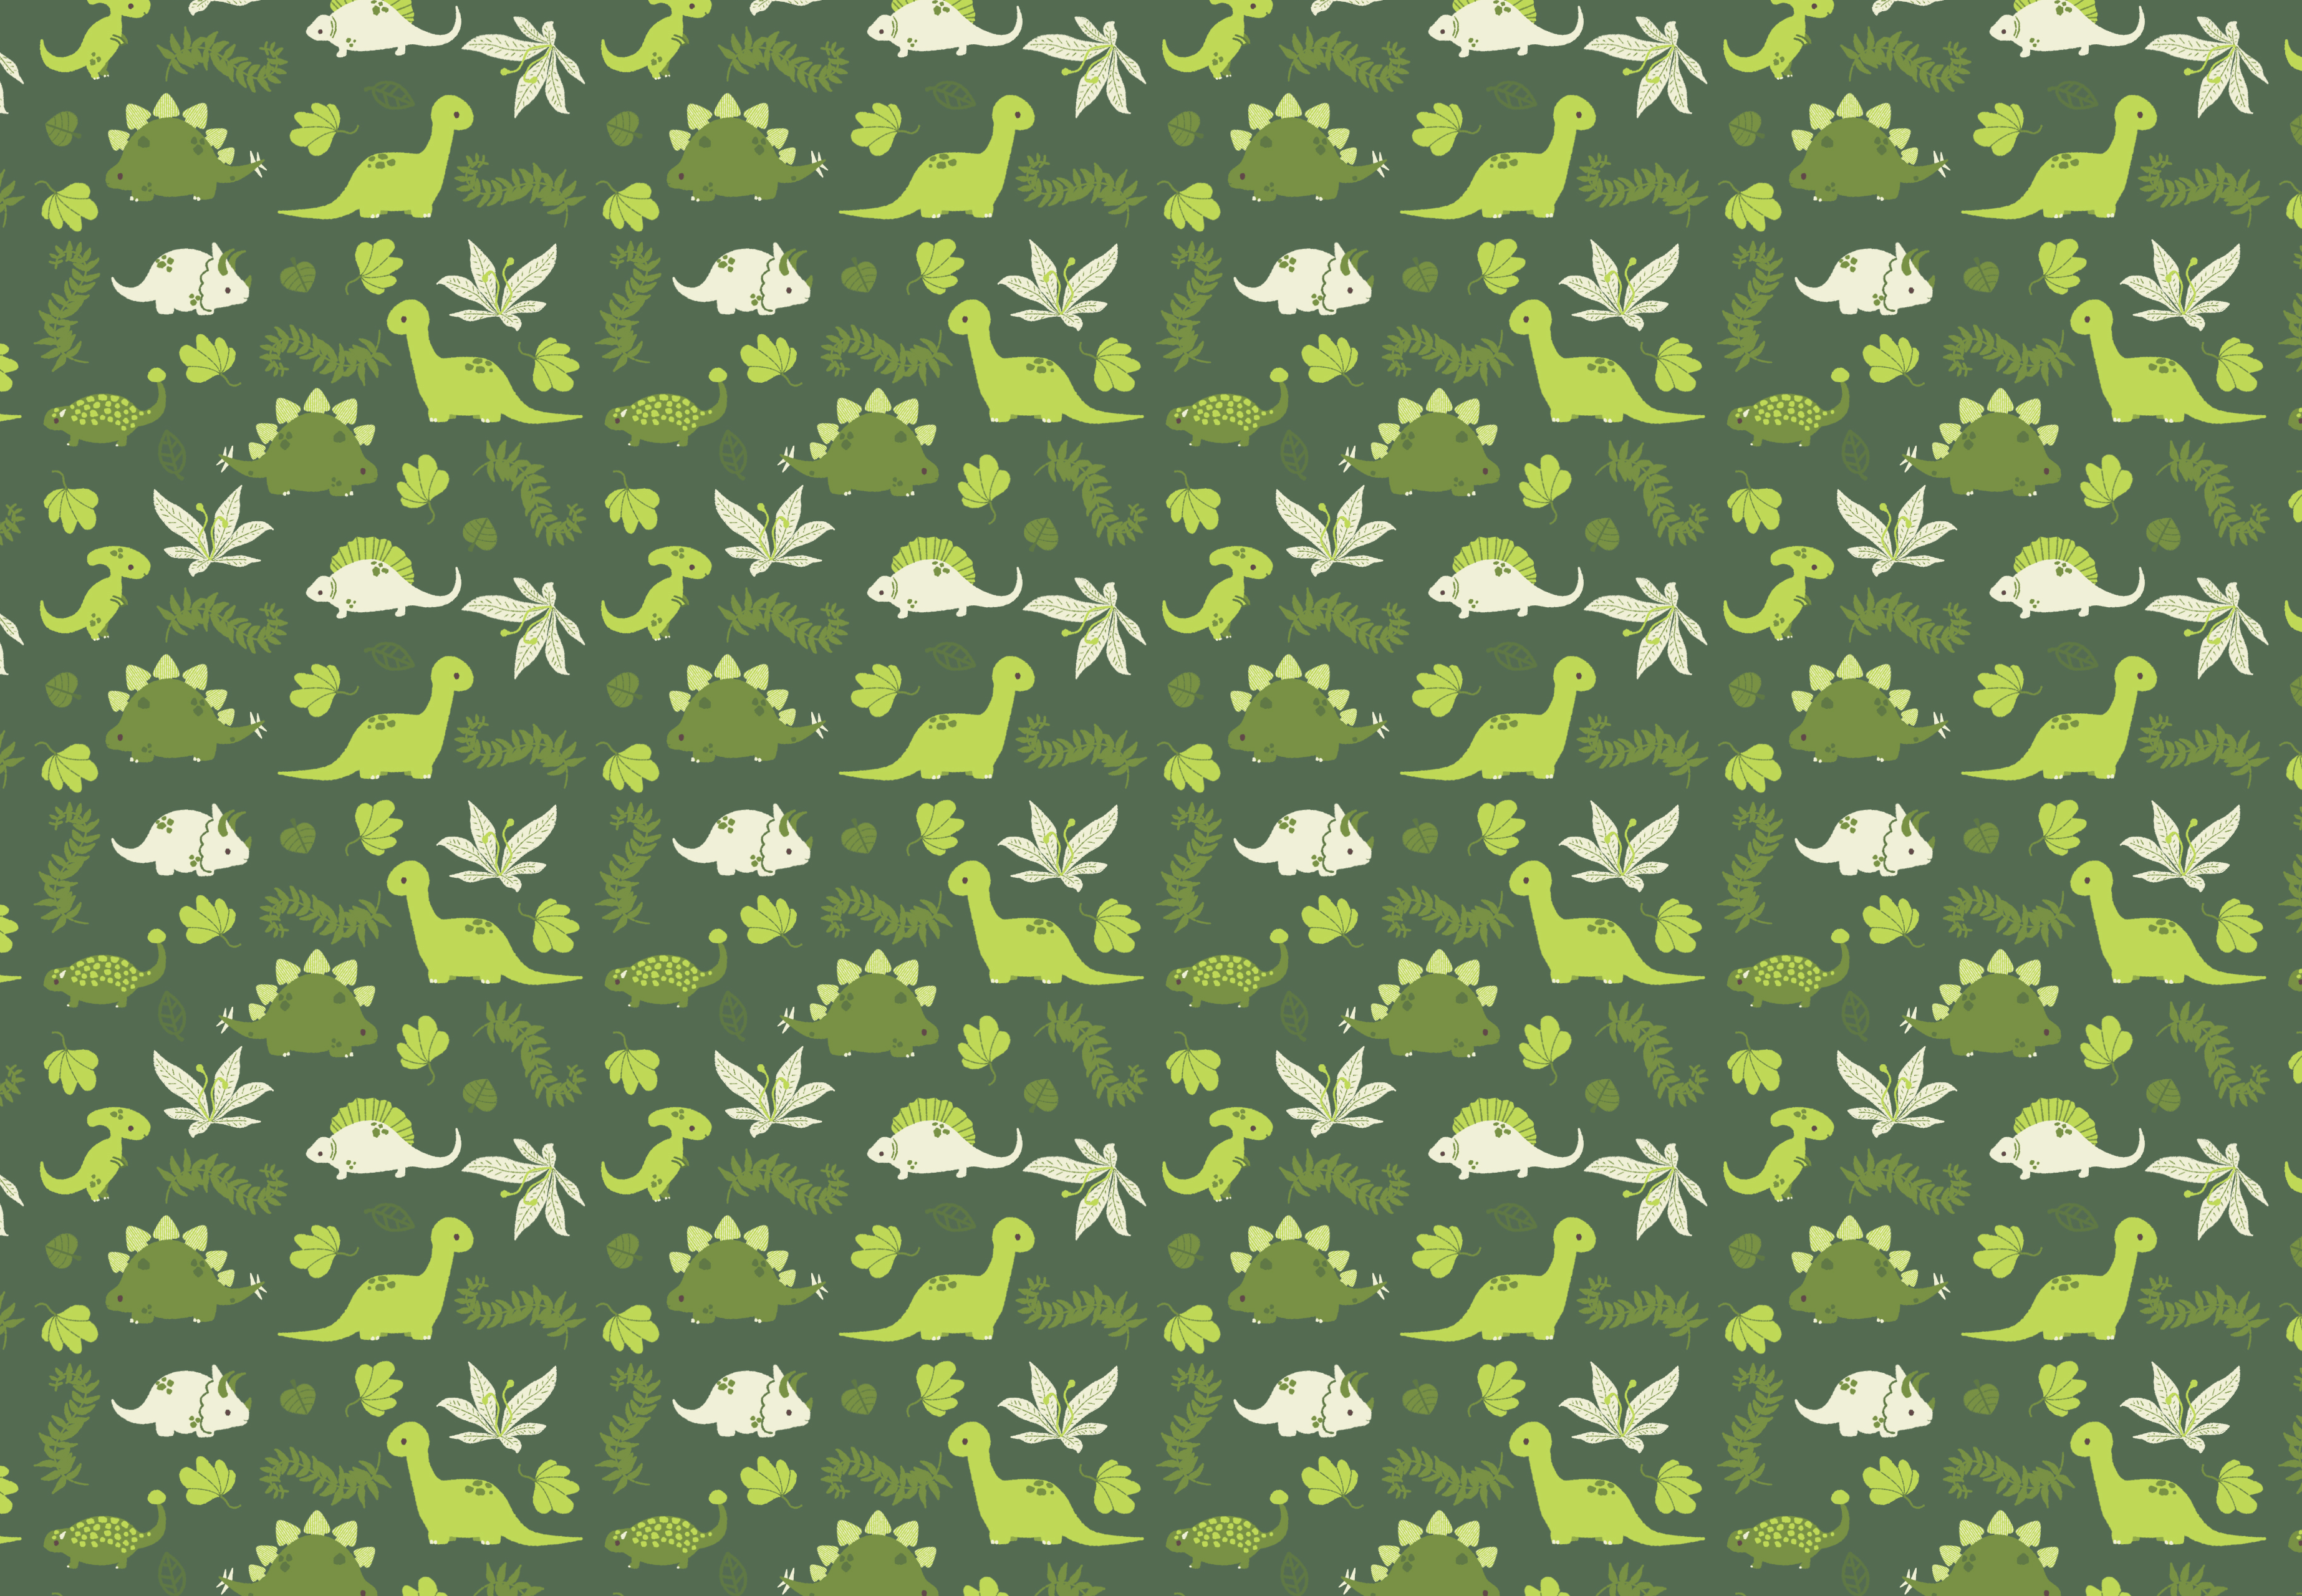 Android Wallpaper: Fun With Patterns